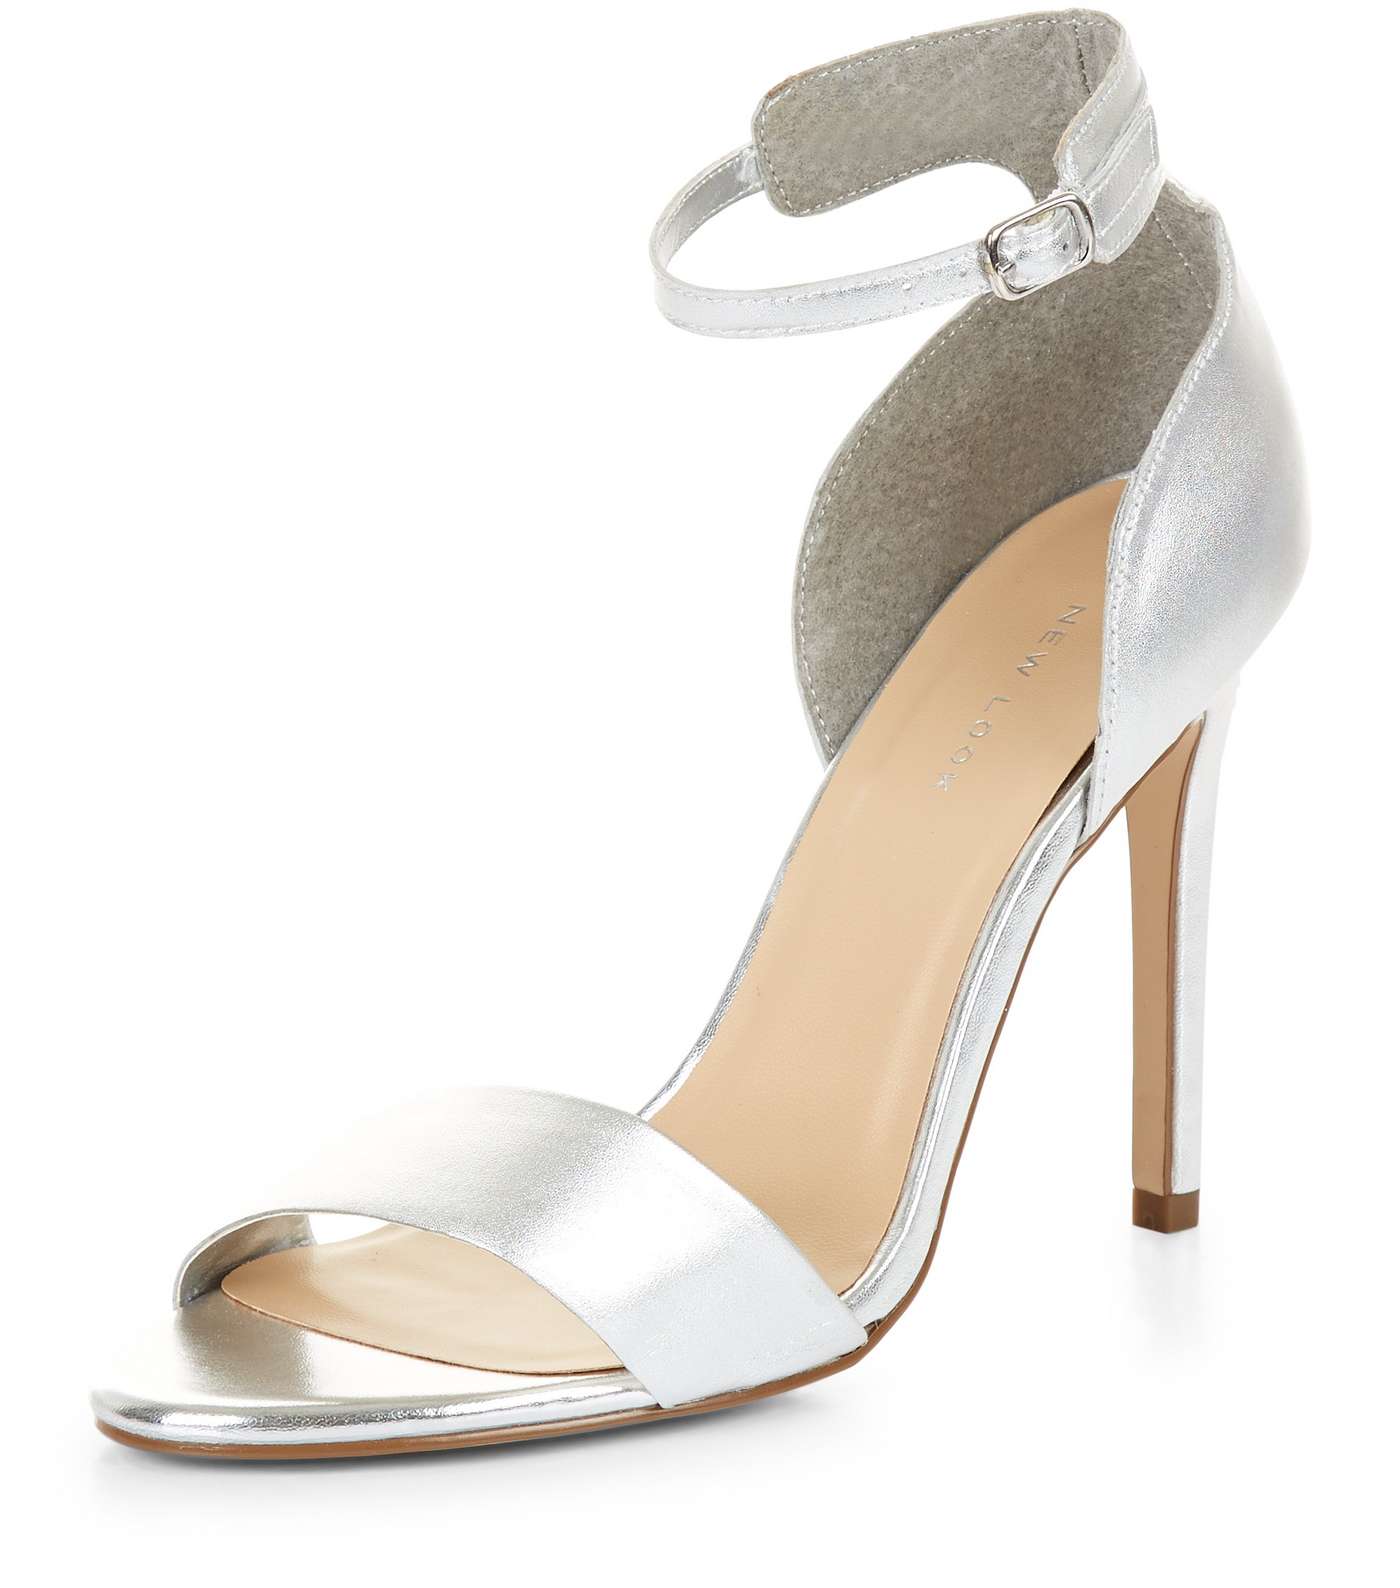 Silver Metallic Leather Ankle Strap Heels Image 5